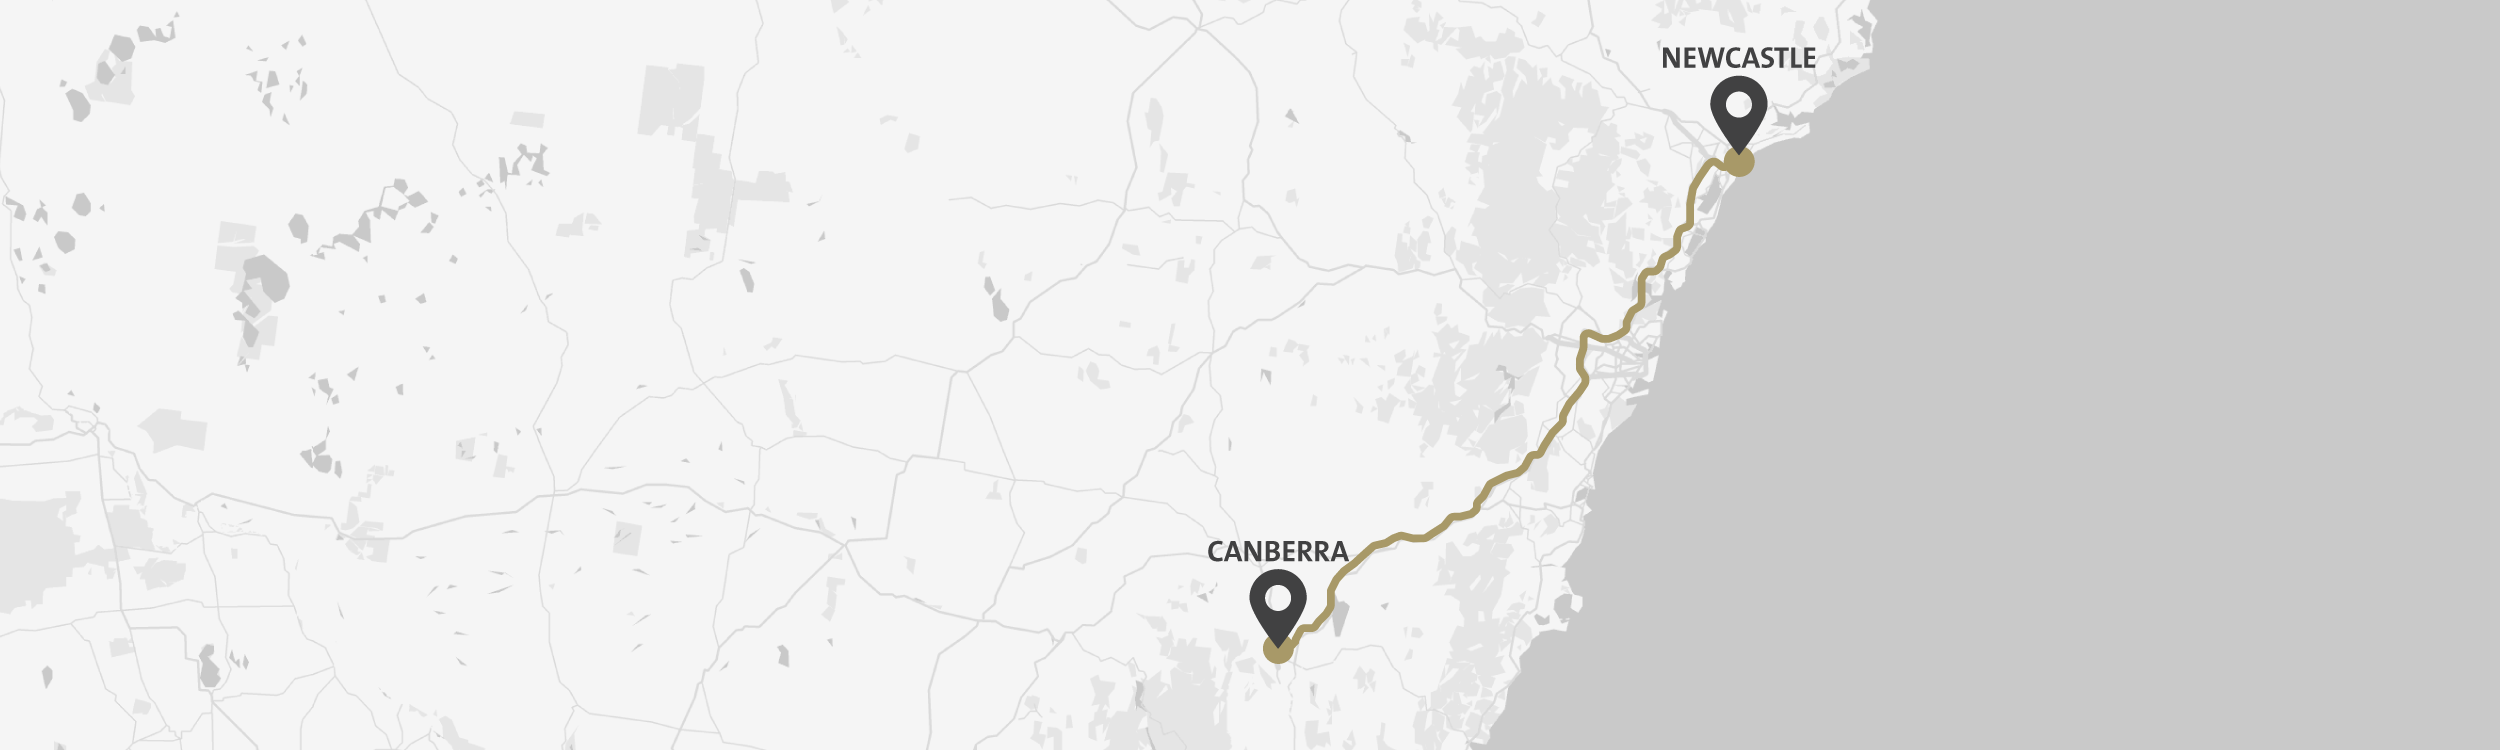 Newcastle to Canberra Road Trip